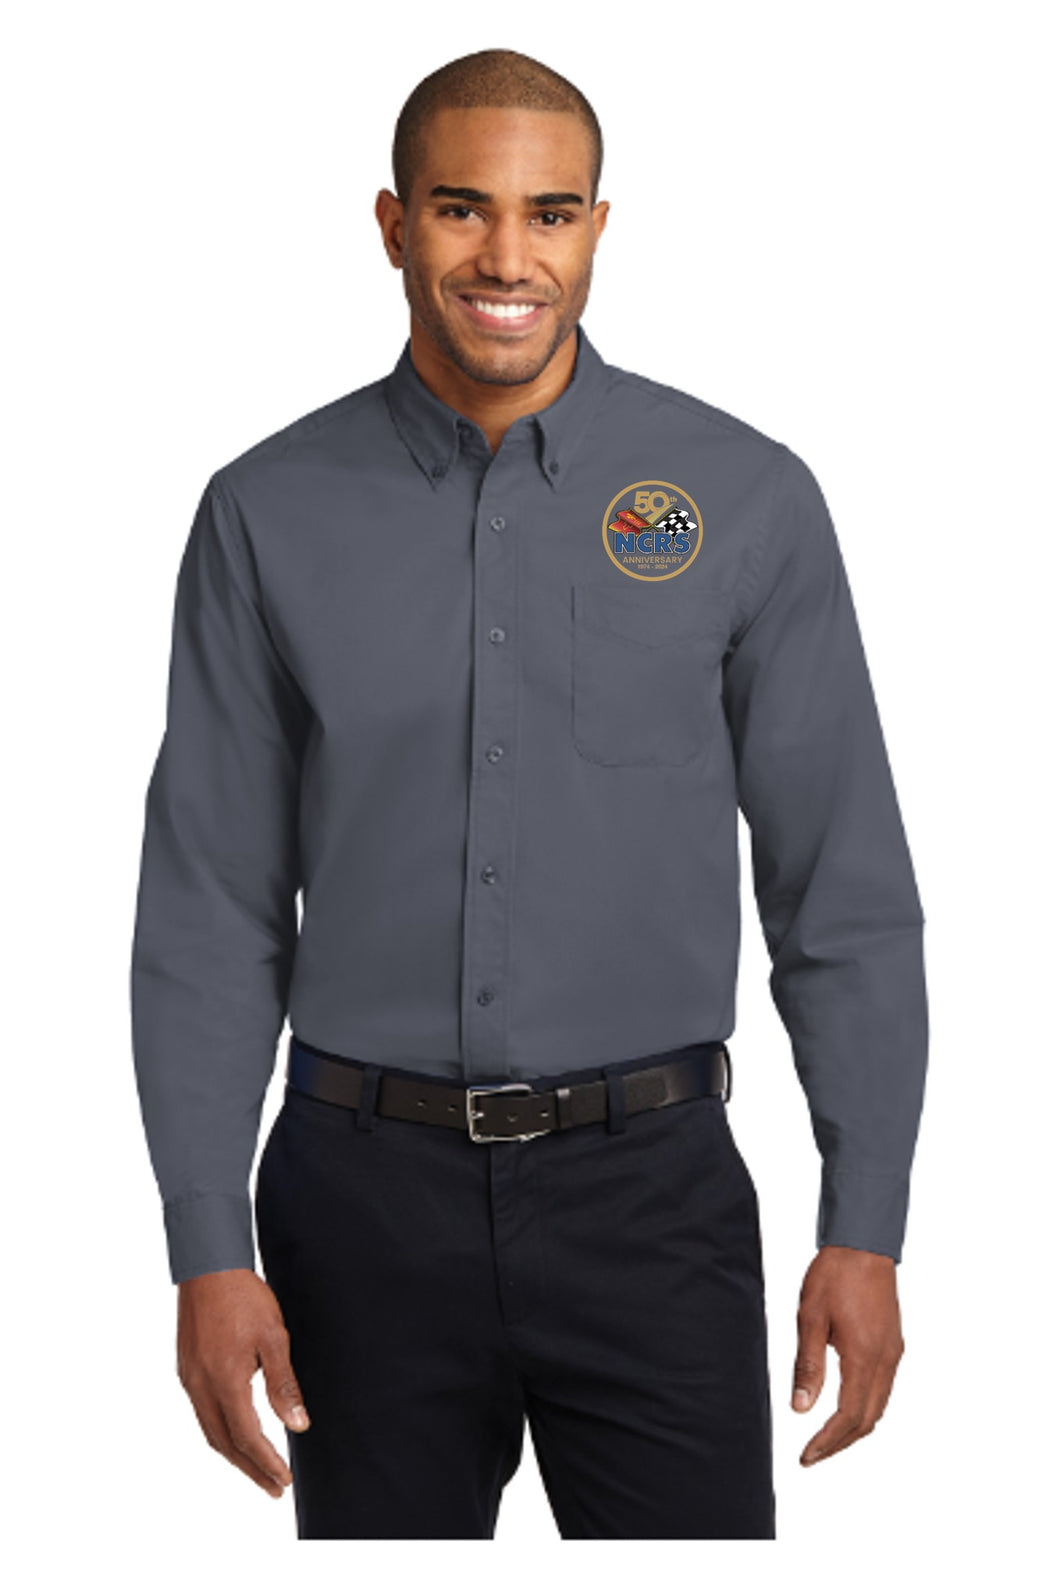 NCRS 50TH ANNIVERSARY OXFORD BUTTON UP SHIRT